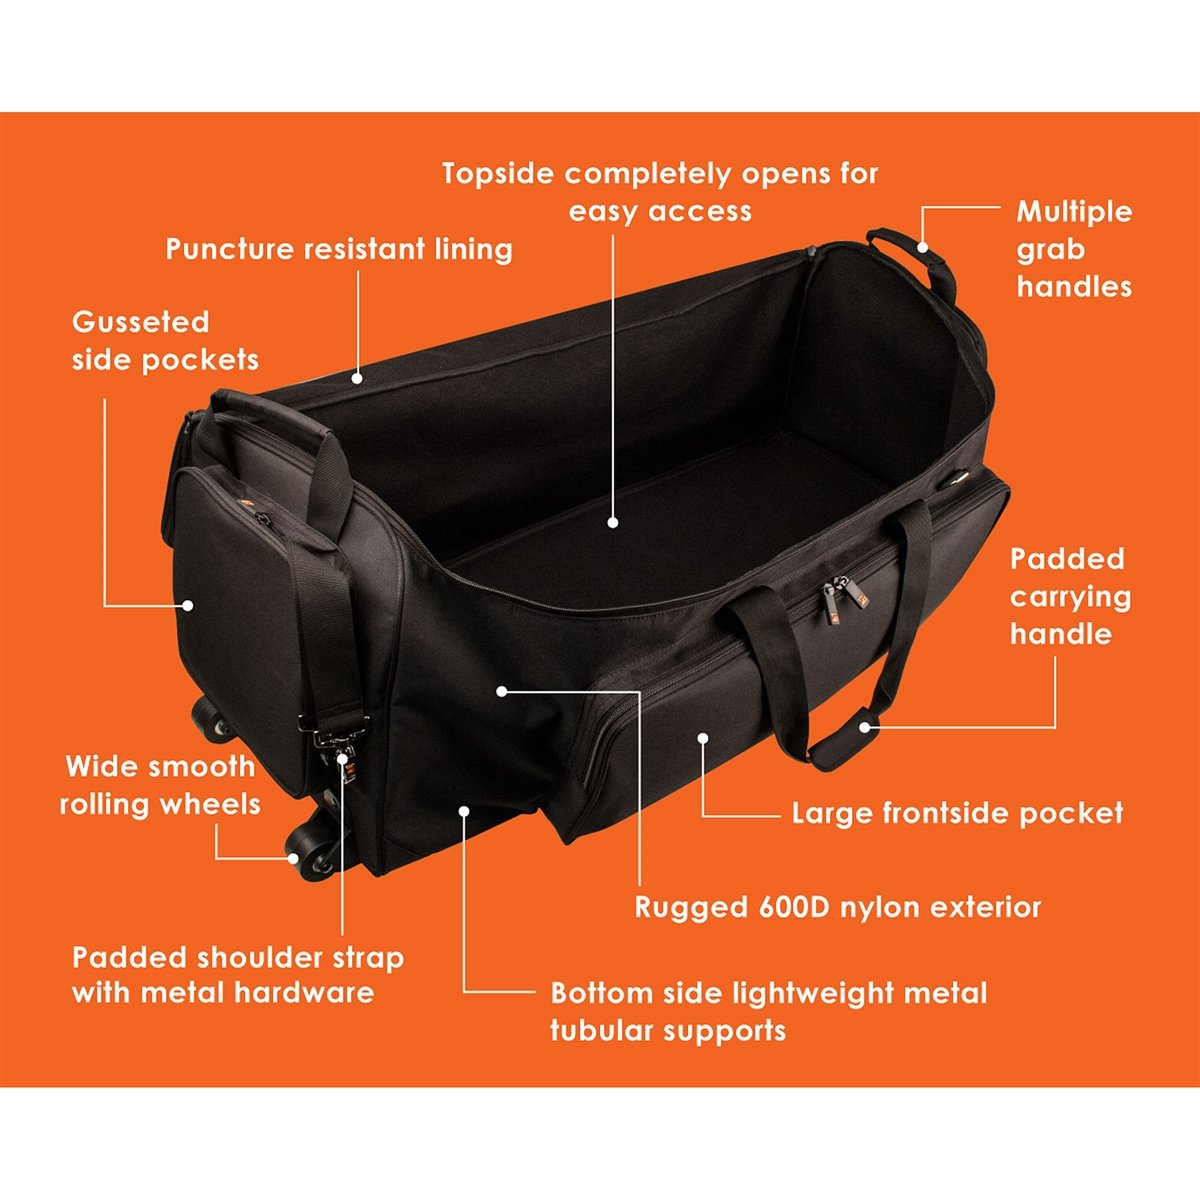 Protec - 36â€³ Hardware Bag with Wheels-Percussion-Protec-Music Elements